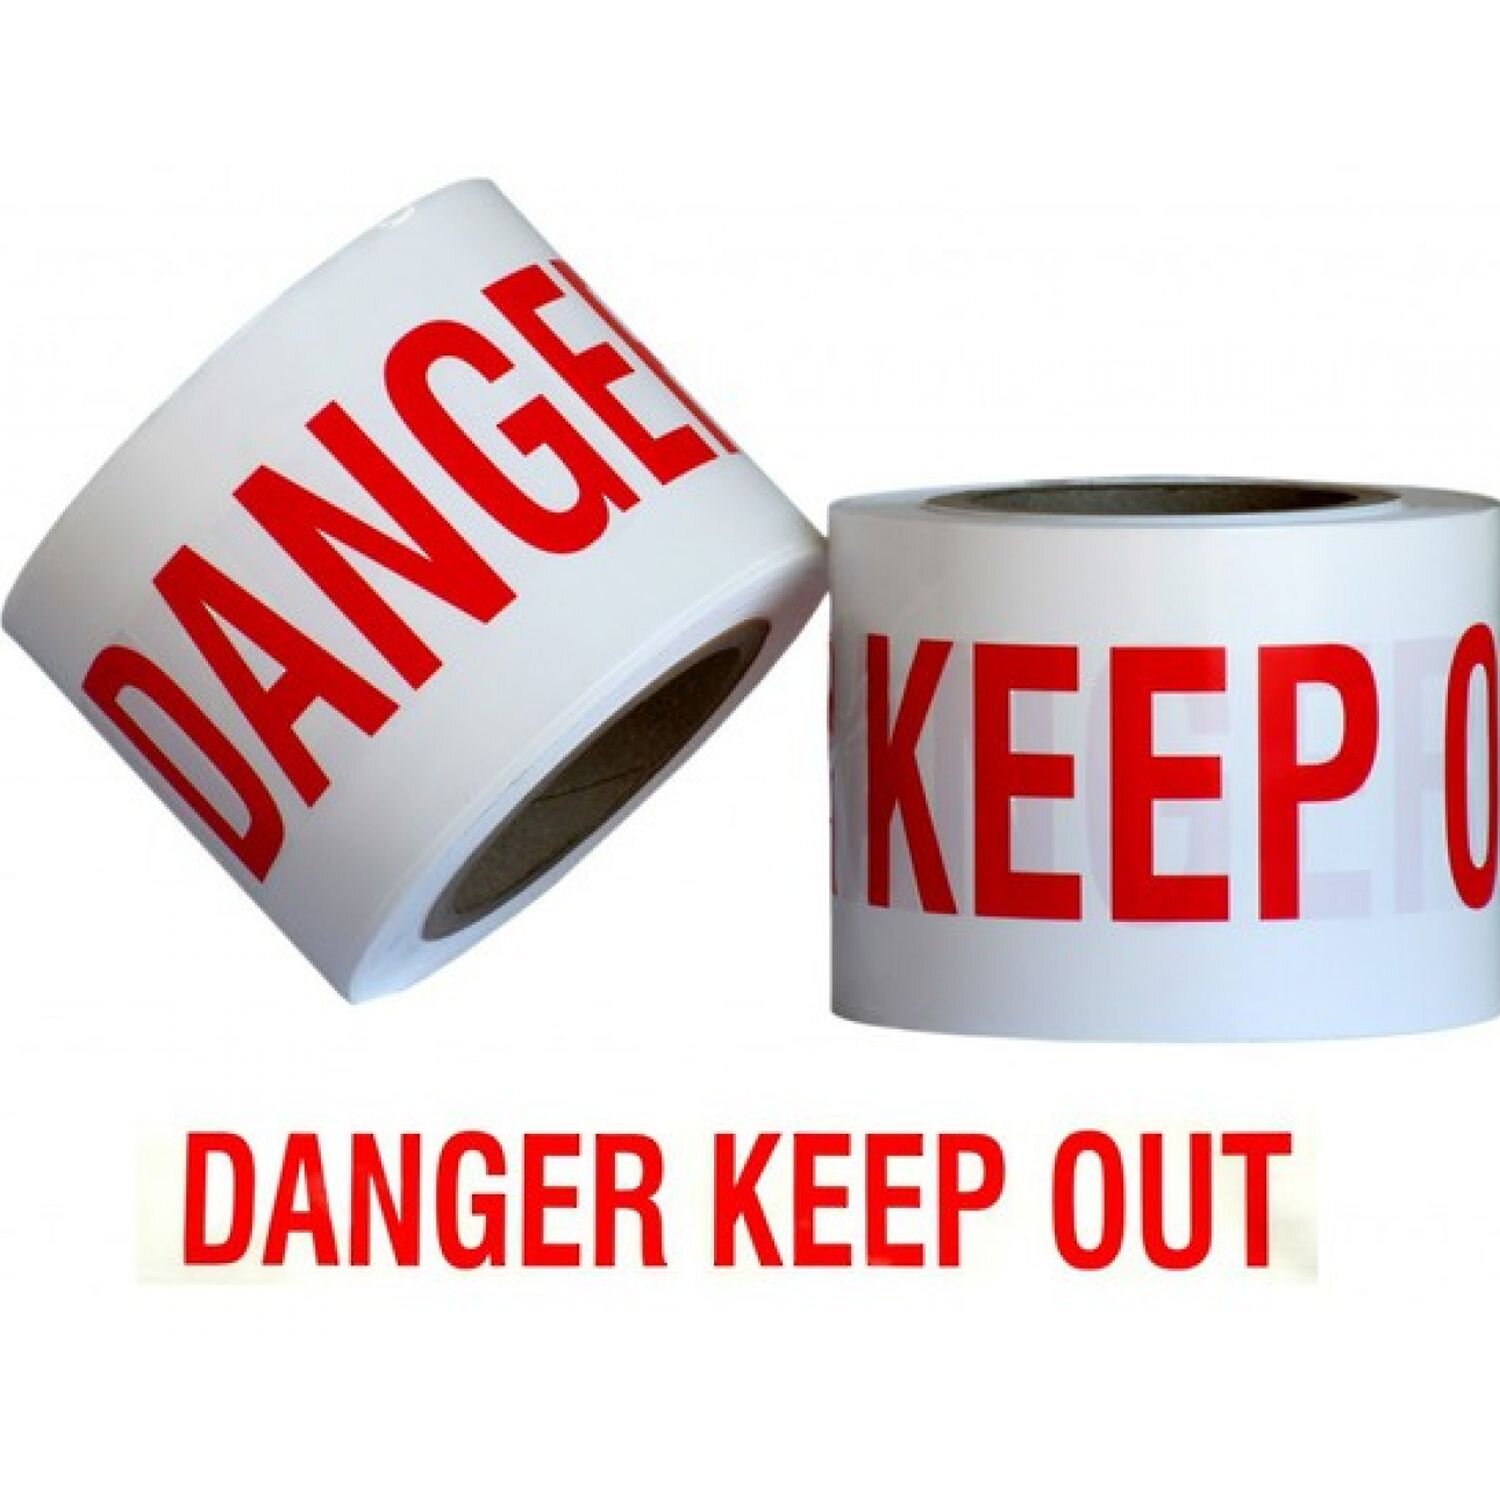 Barrier Tape Danger Keep Out White/Red 75mm x 250m